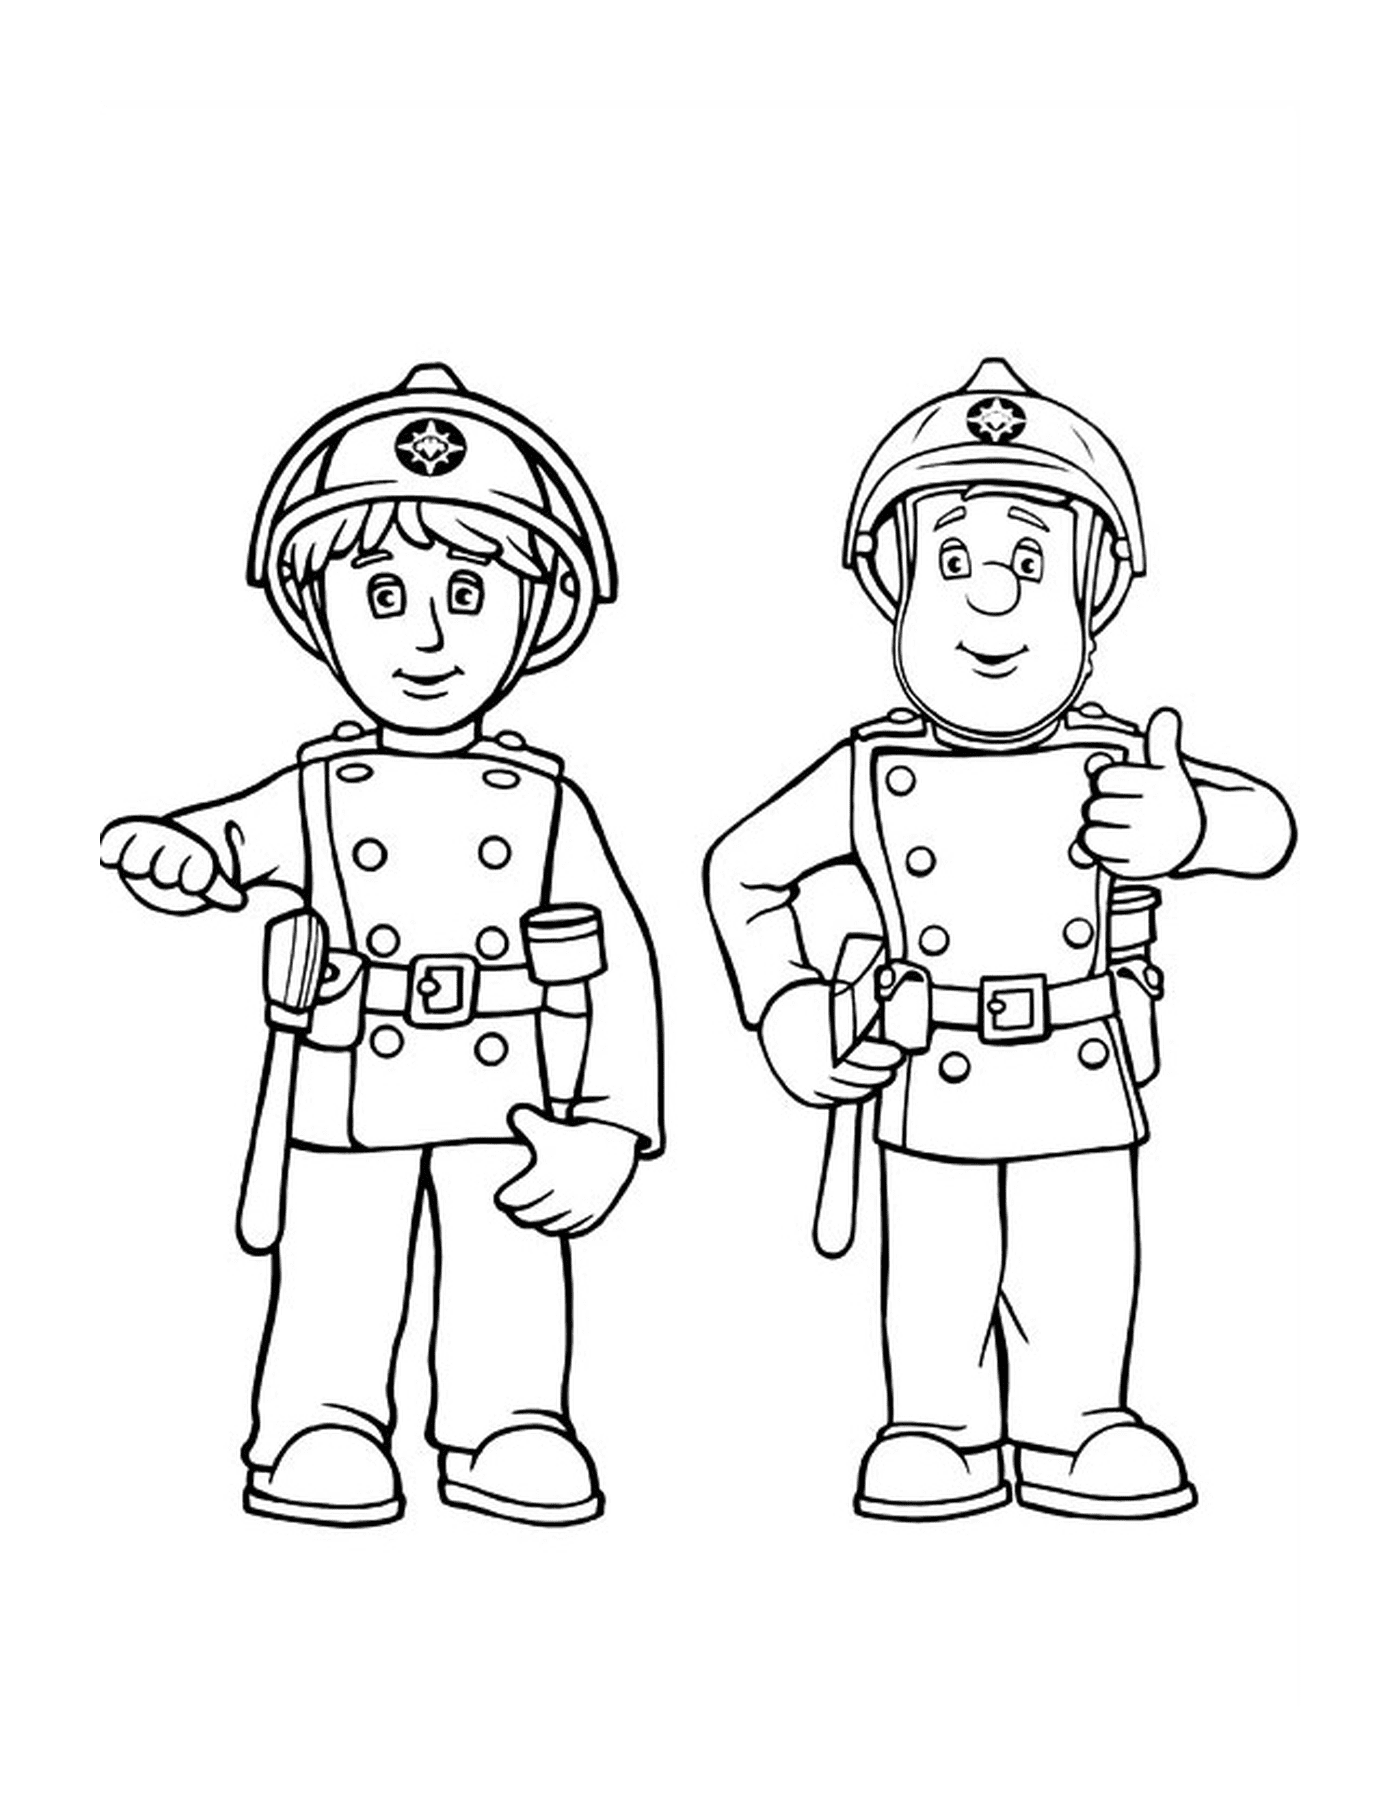  Sam the fireman and his friend from the barracks 